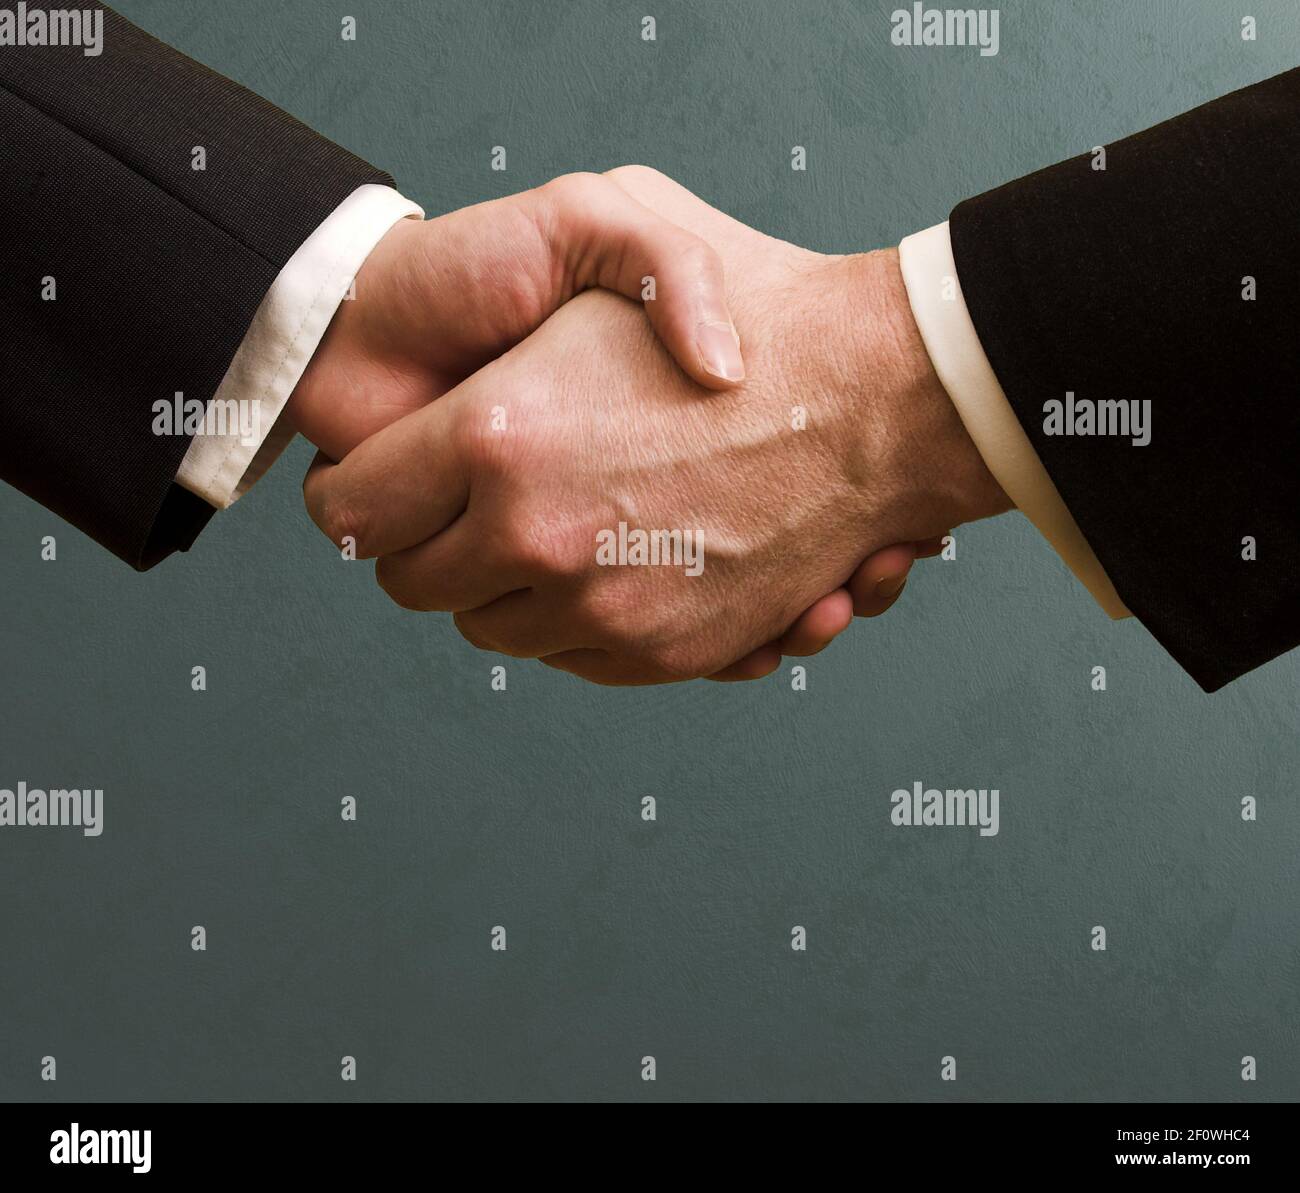 Two business men sealing a deal Stock Photo